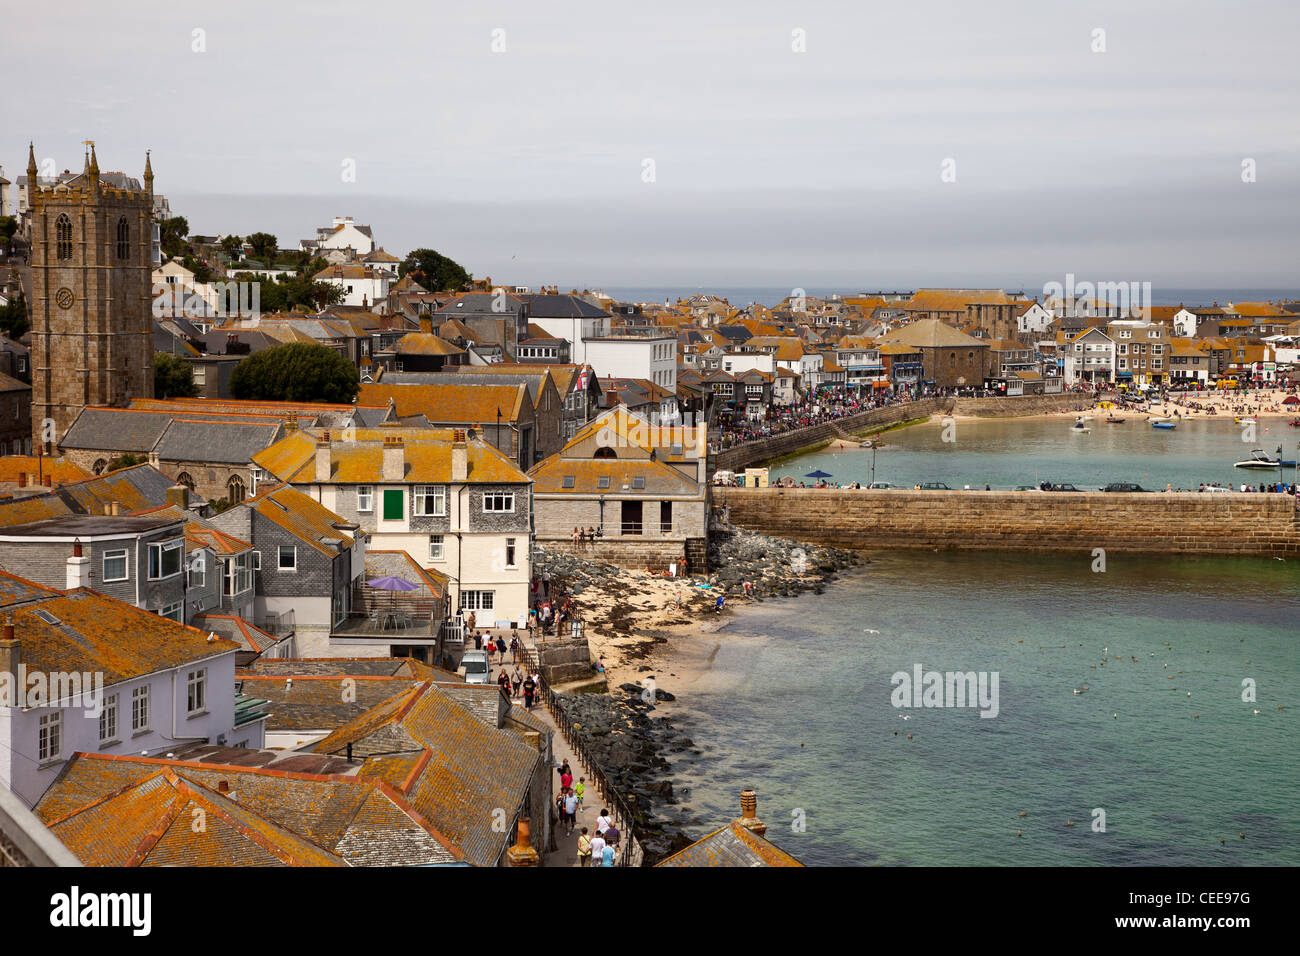 Church and rooftops at St Ives, cornwall,uk. Lichen covered rooftops, st ives harbour beach and granite stone jetty. Stock Photo